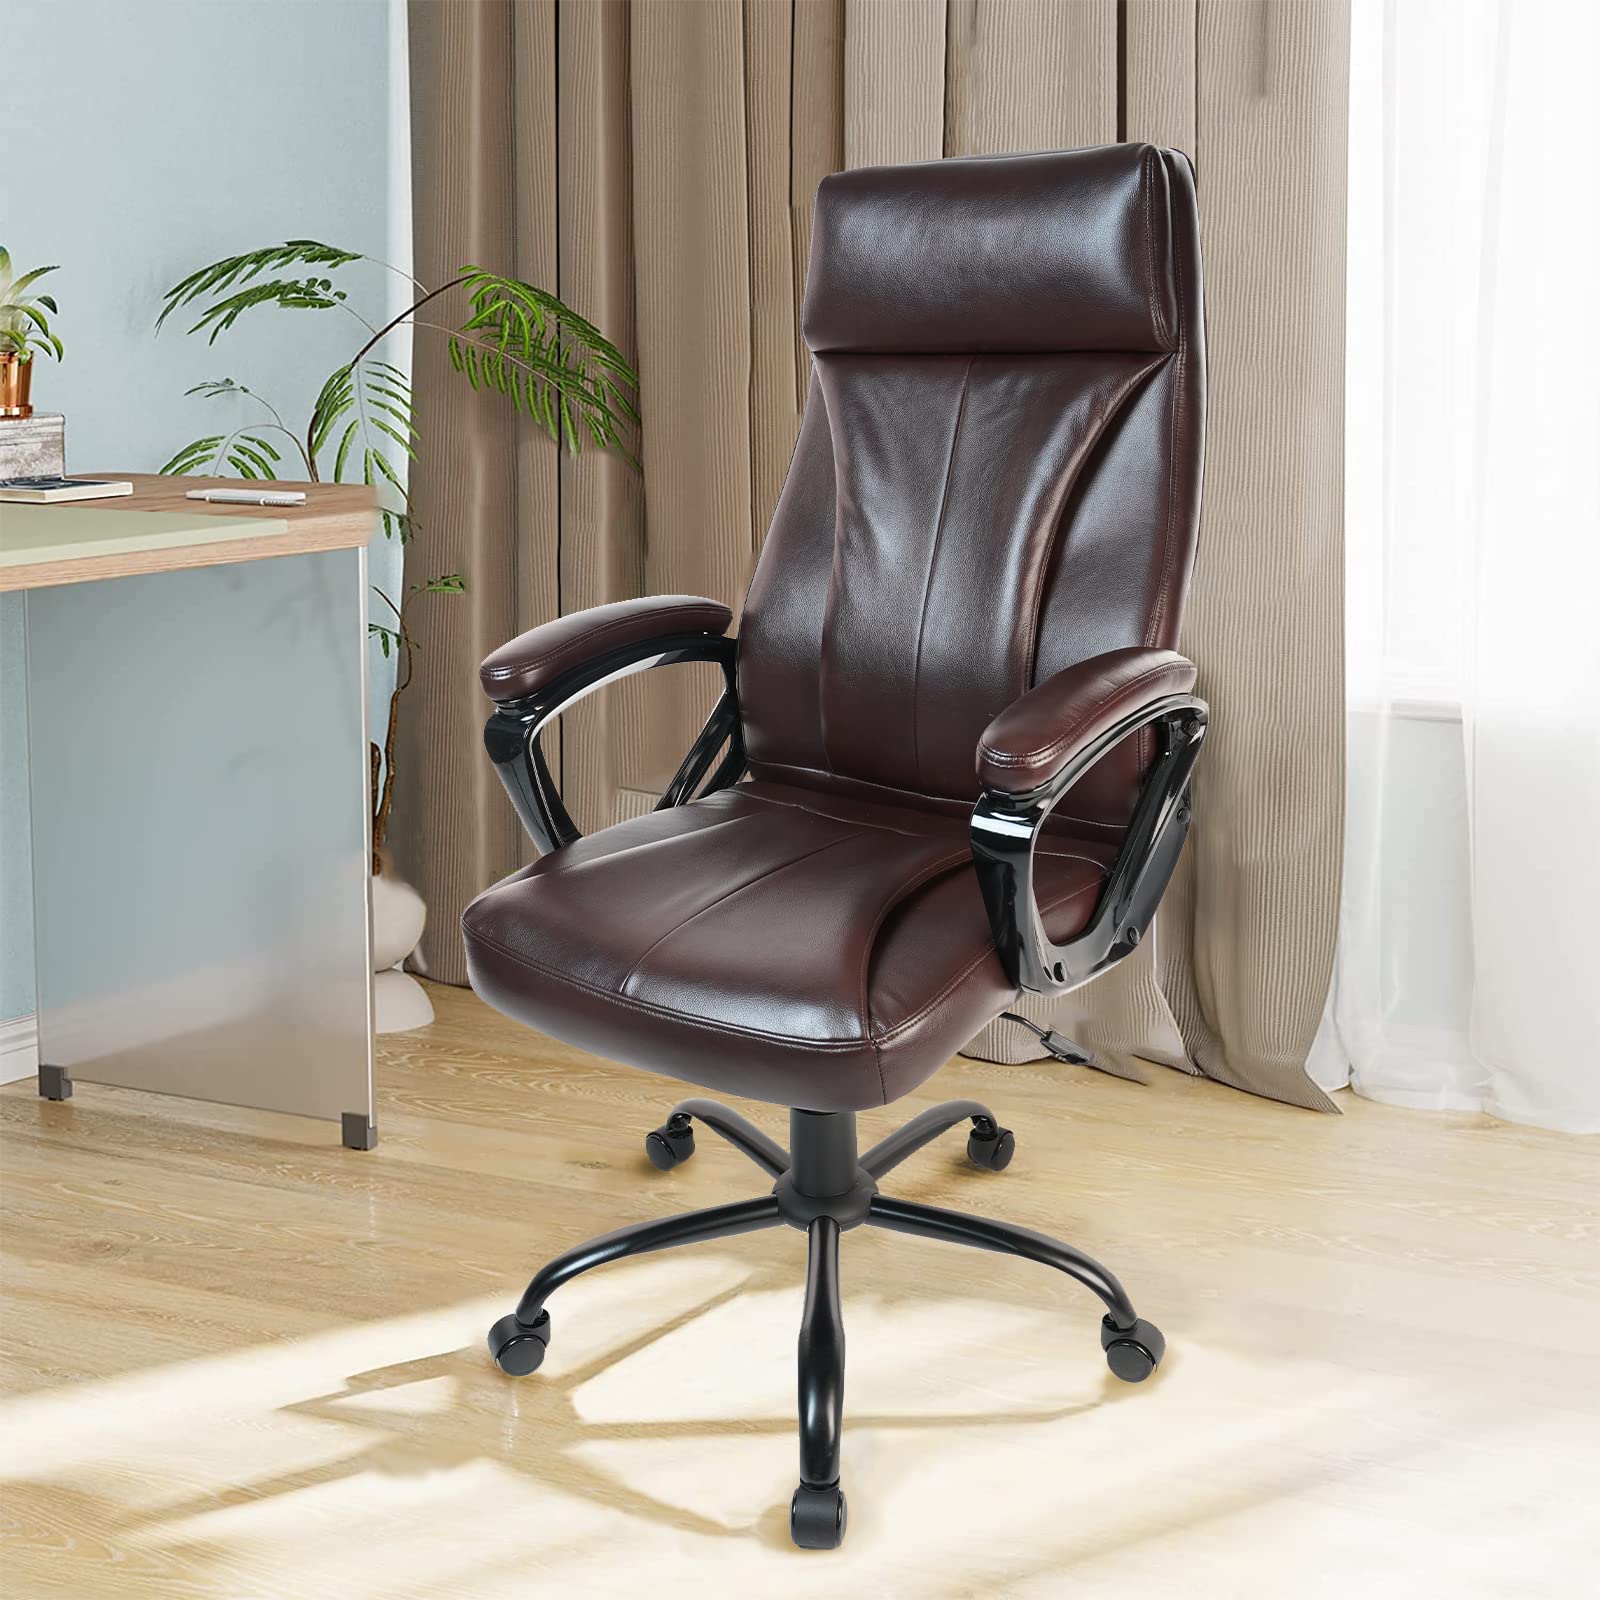 Executive Office Chair Computer Desk Chair with Padded Armrests, Ergonomic Chair Mid Back Lumbar Support and Adjustable Height and Tilt Angle Home